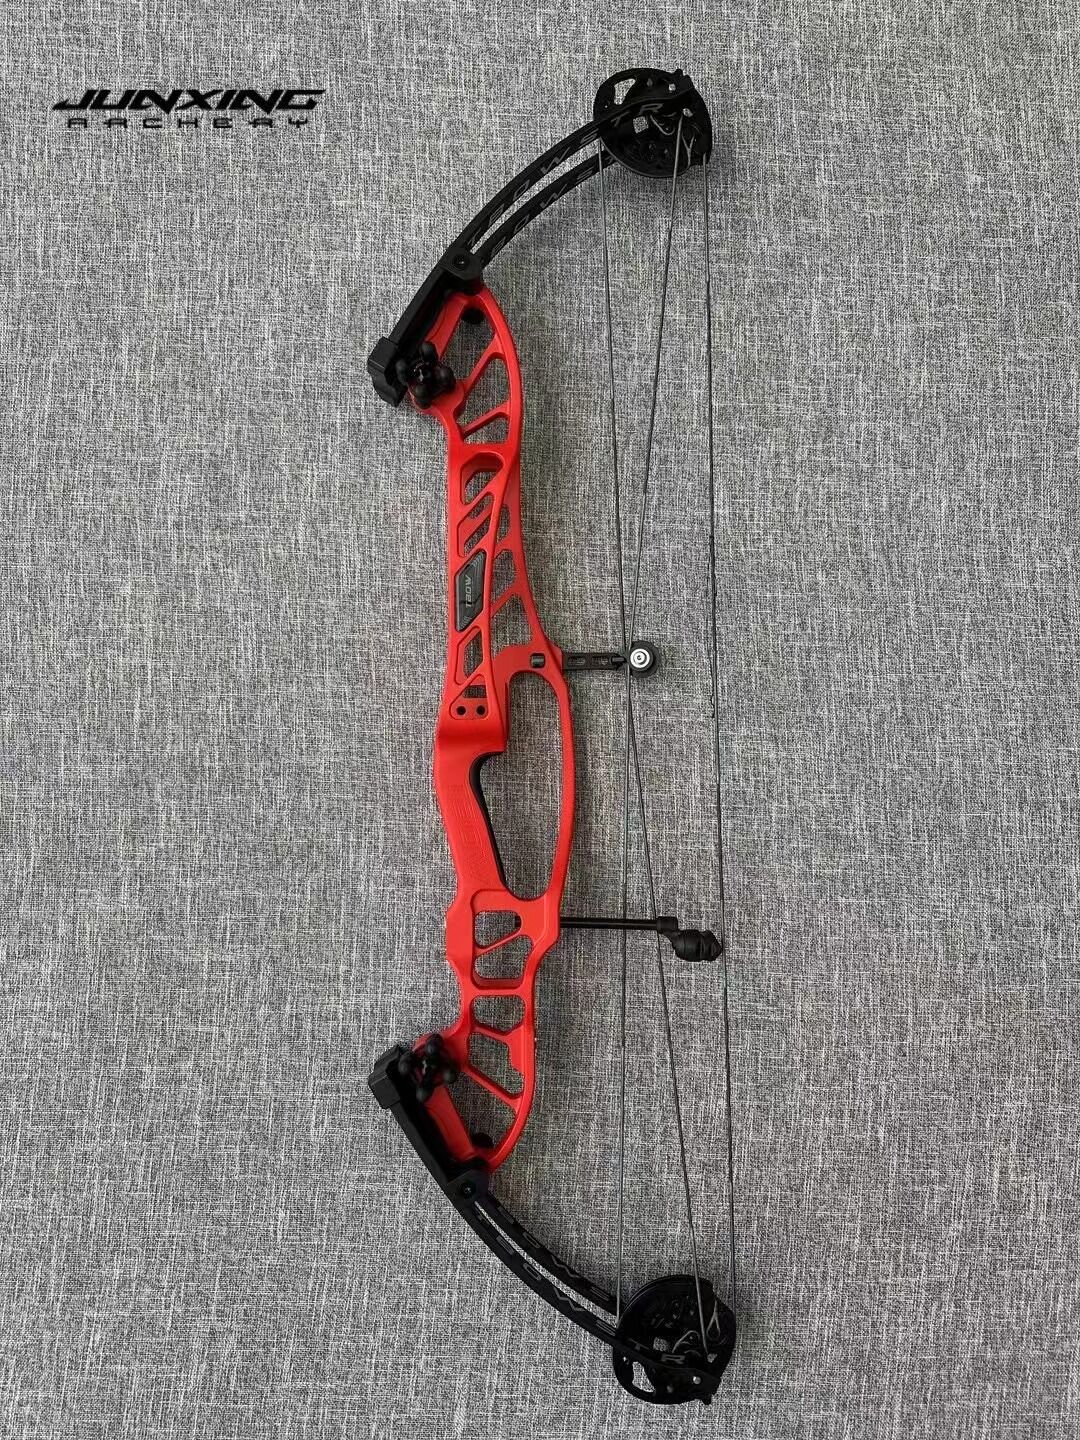 🎯JUNXING Archery H20 Compound Bow for Upgrade Archery Target